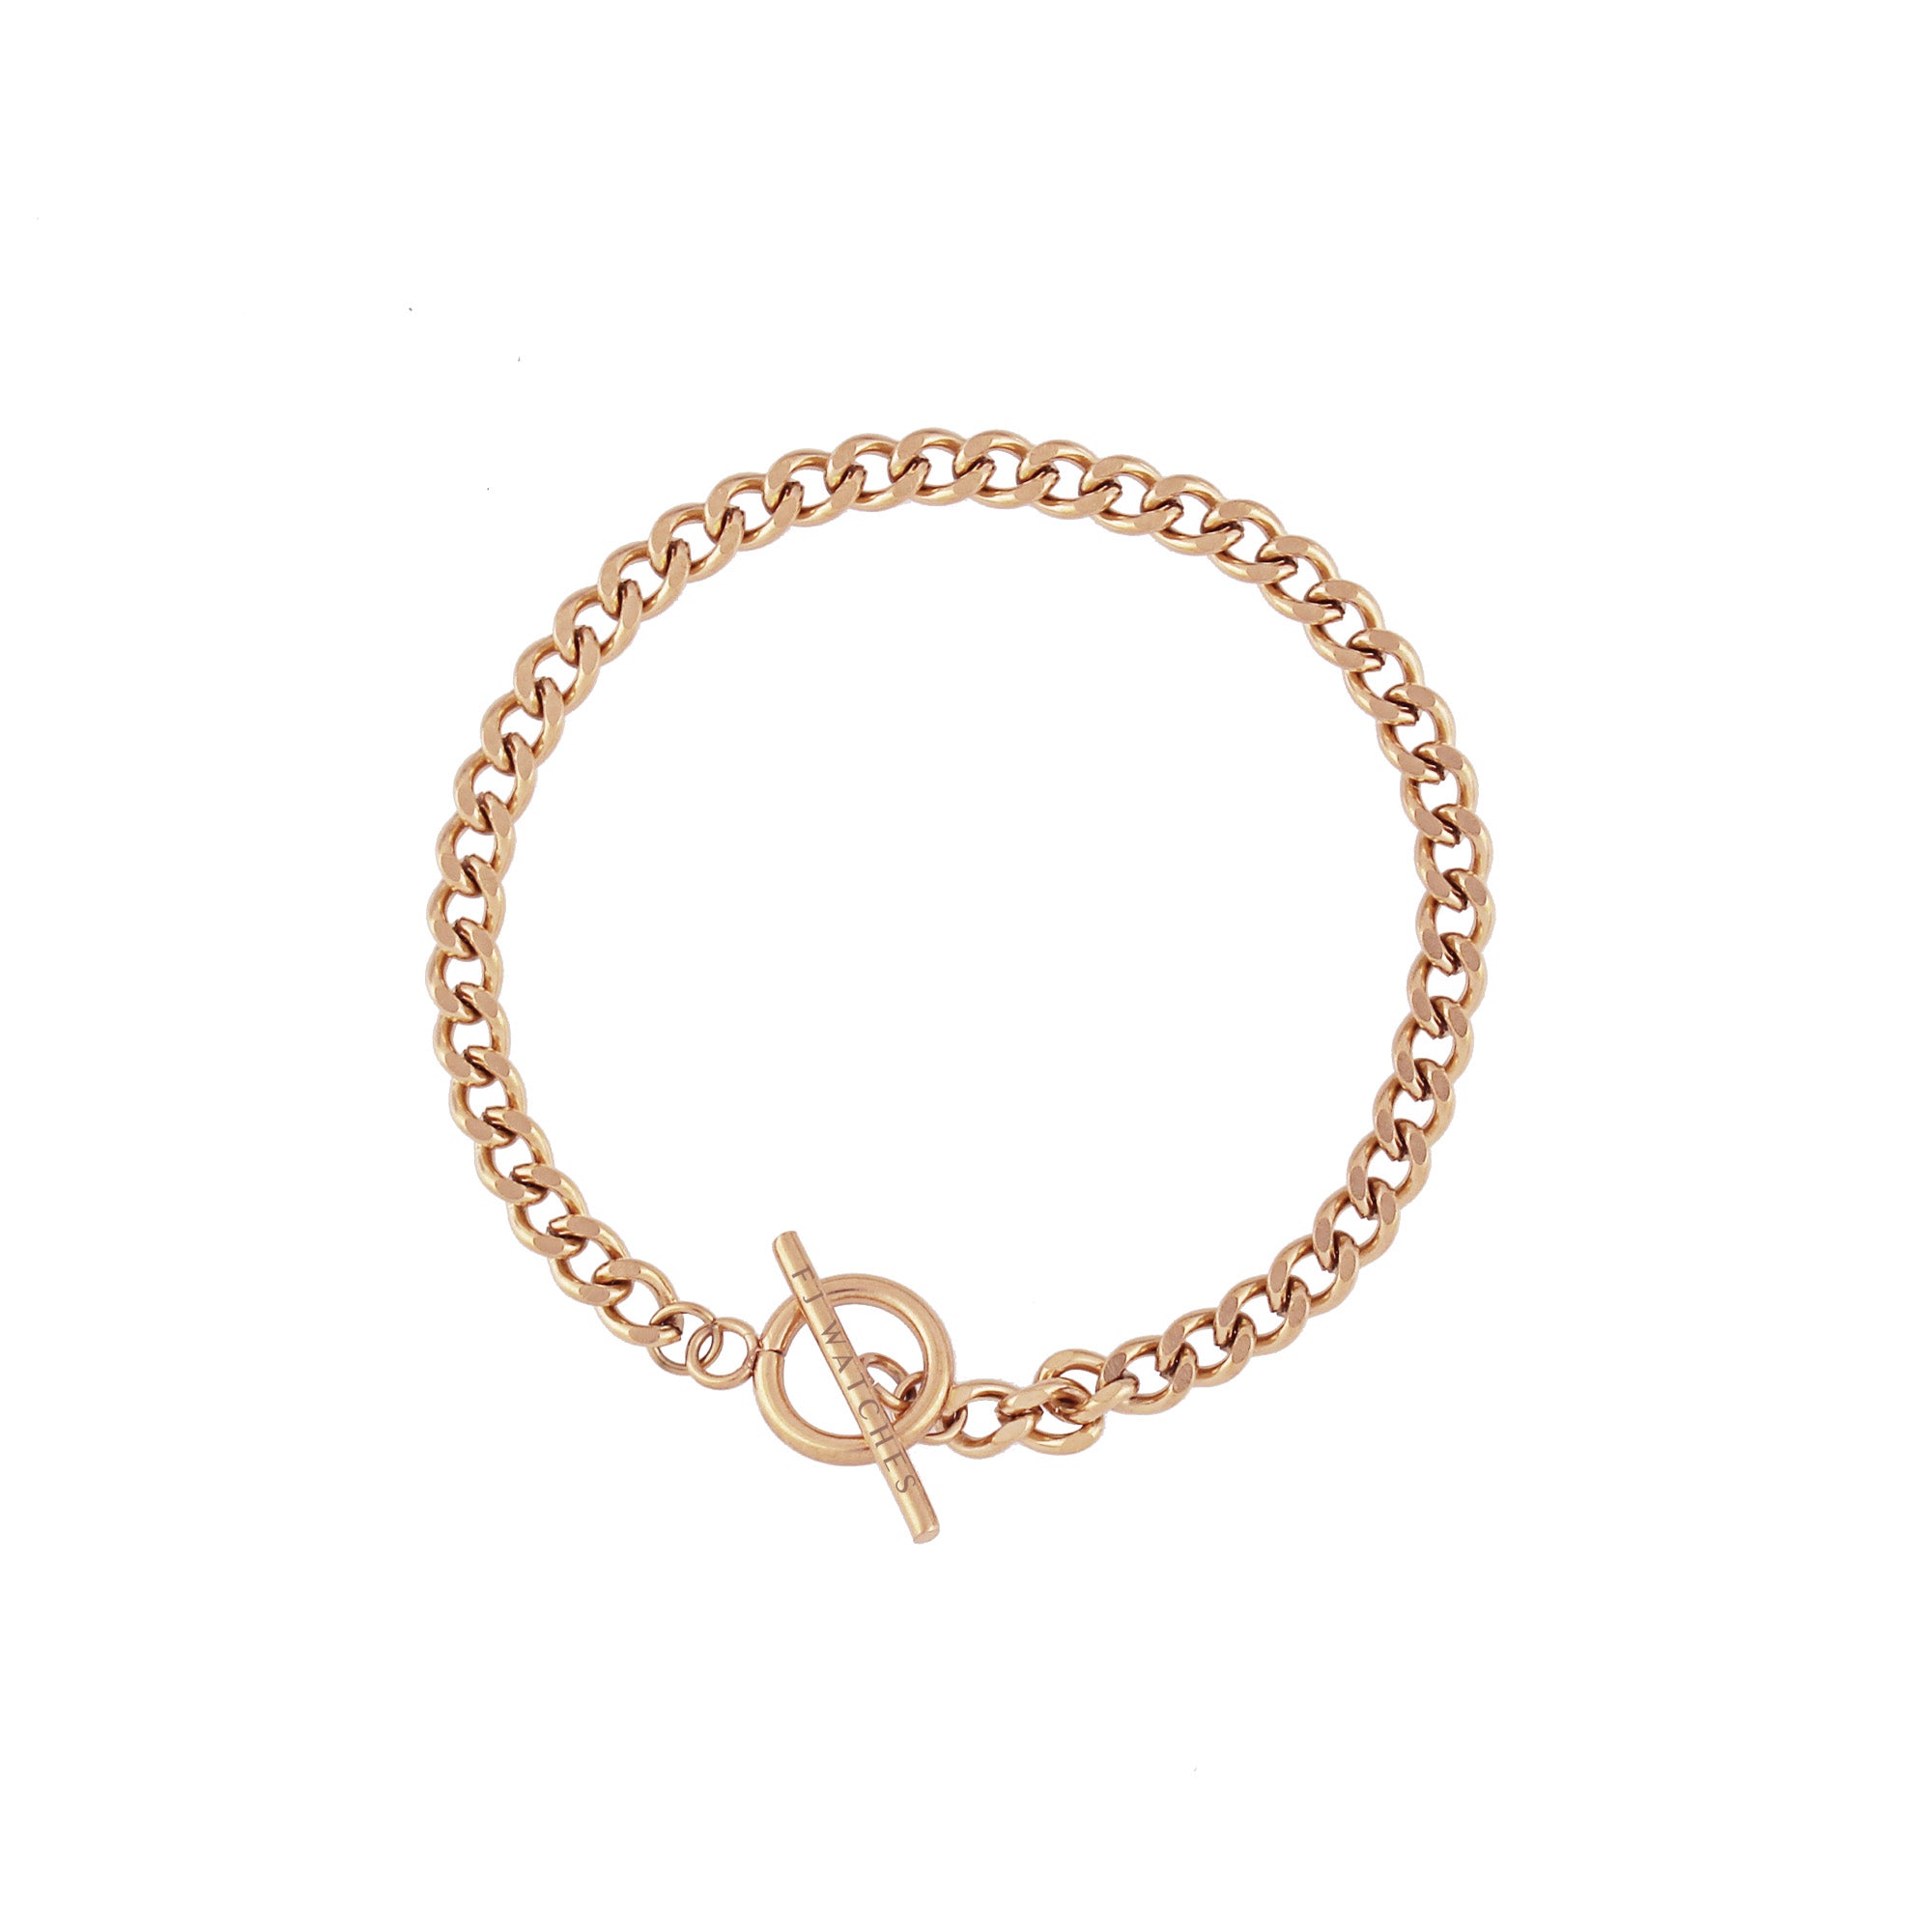 Jucar bracelet from Five Jwlry, designed in Montreal, Canada. Features a Cuban chain link in rose gold colored, ultra-resistant 316L stainless steel with a distinctive circular toggle clasp closure.